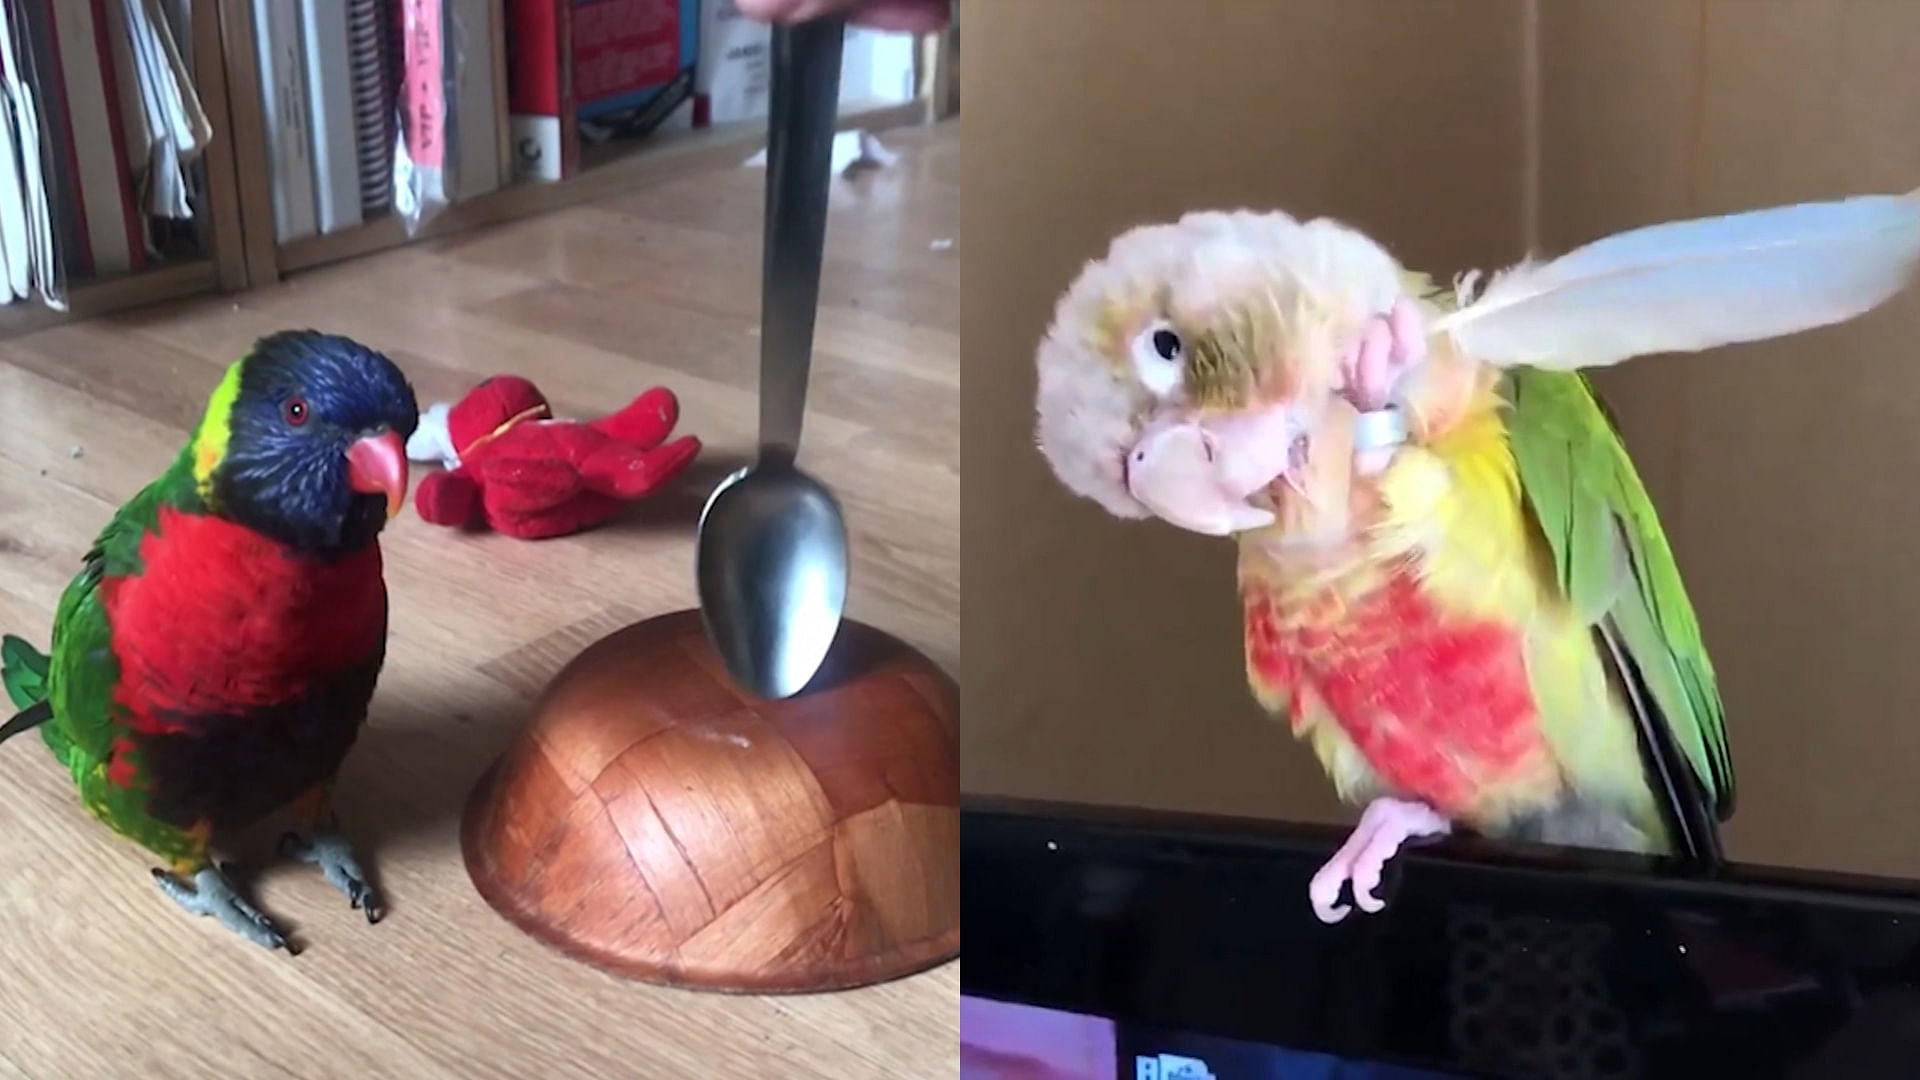 Meet Angel and Kesha, two rather unusual parrots that have developed some rather odd tricks.